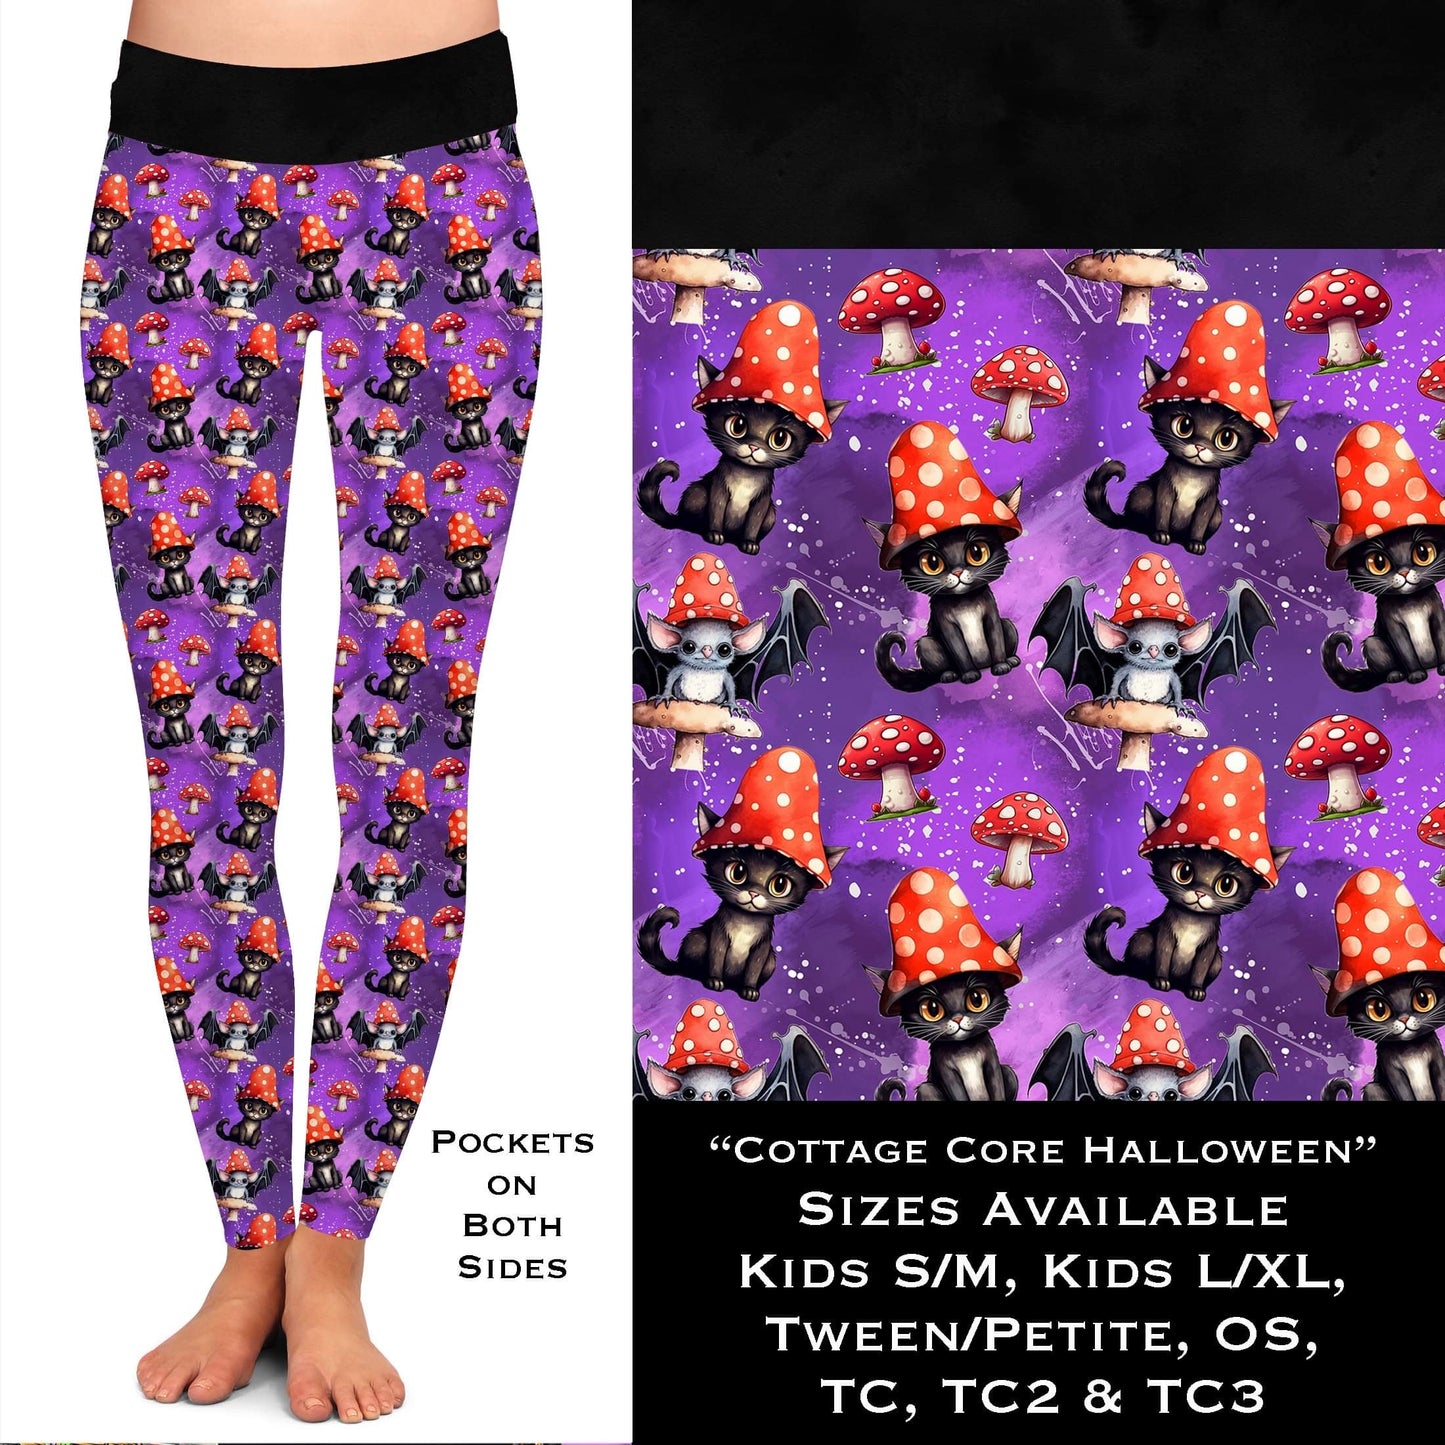 Cottage Core Halloween Leggings with Pockets